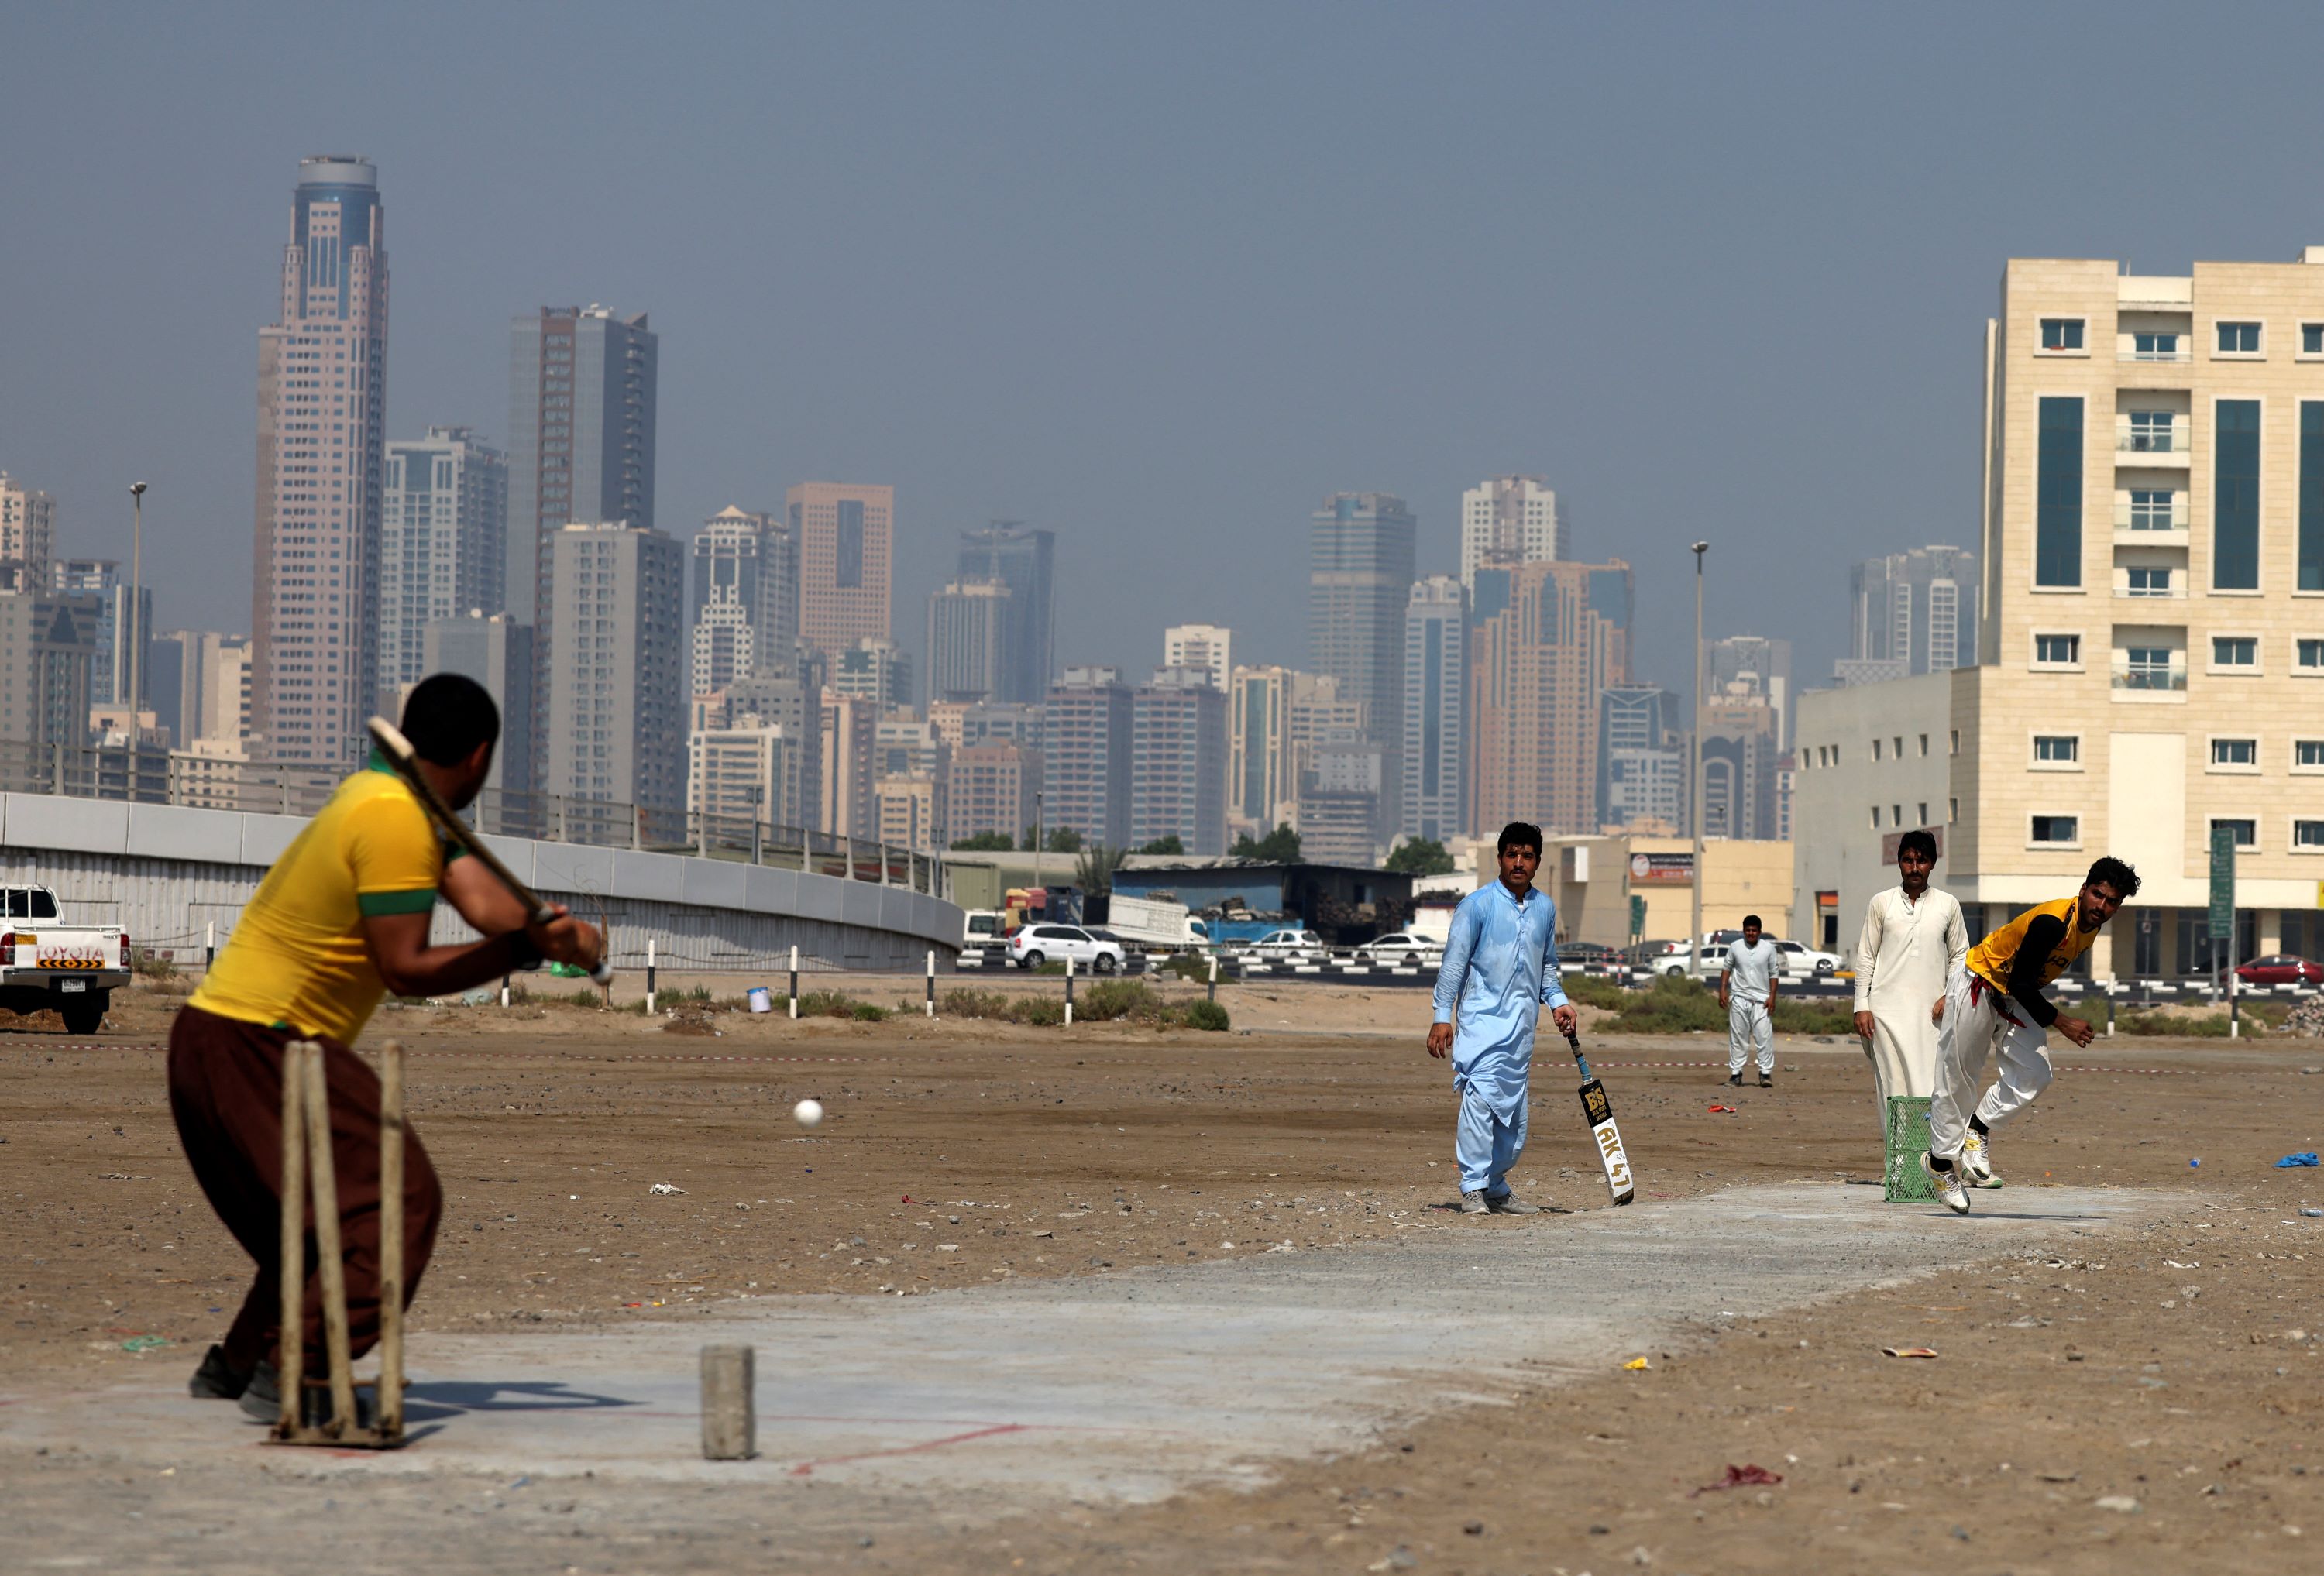 Pakistani workers play cricket in an industrial zone in the Gulf emirate of Sharjah, during their day off from work, on September 24, 2022 (AFP)